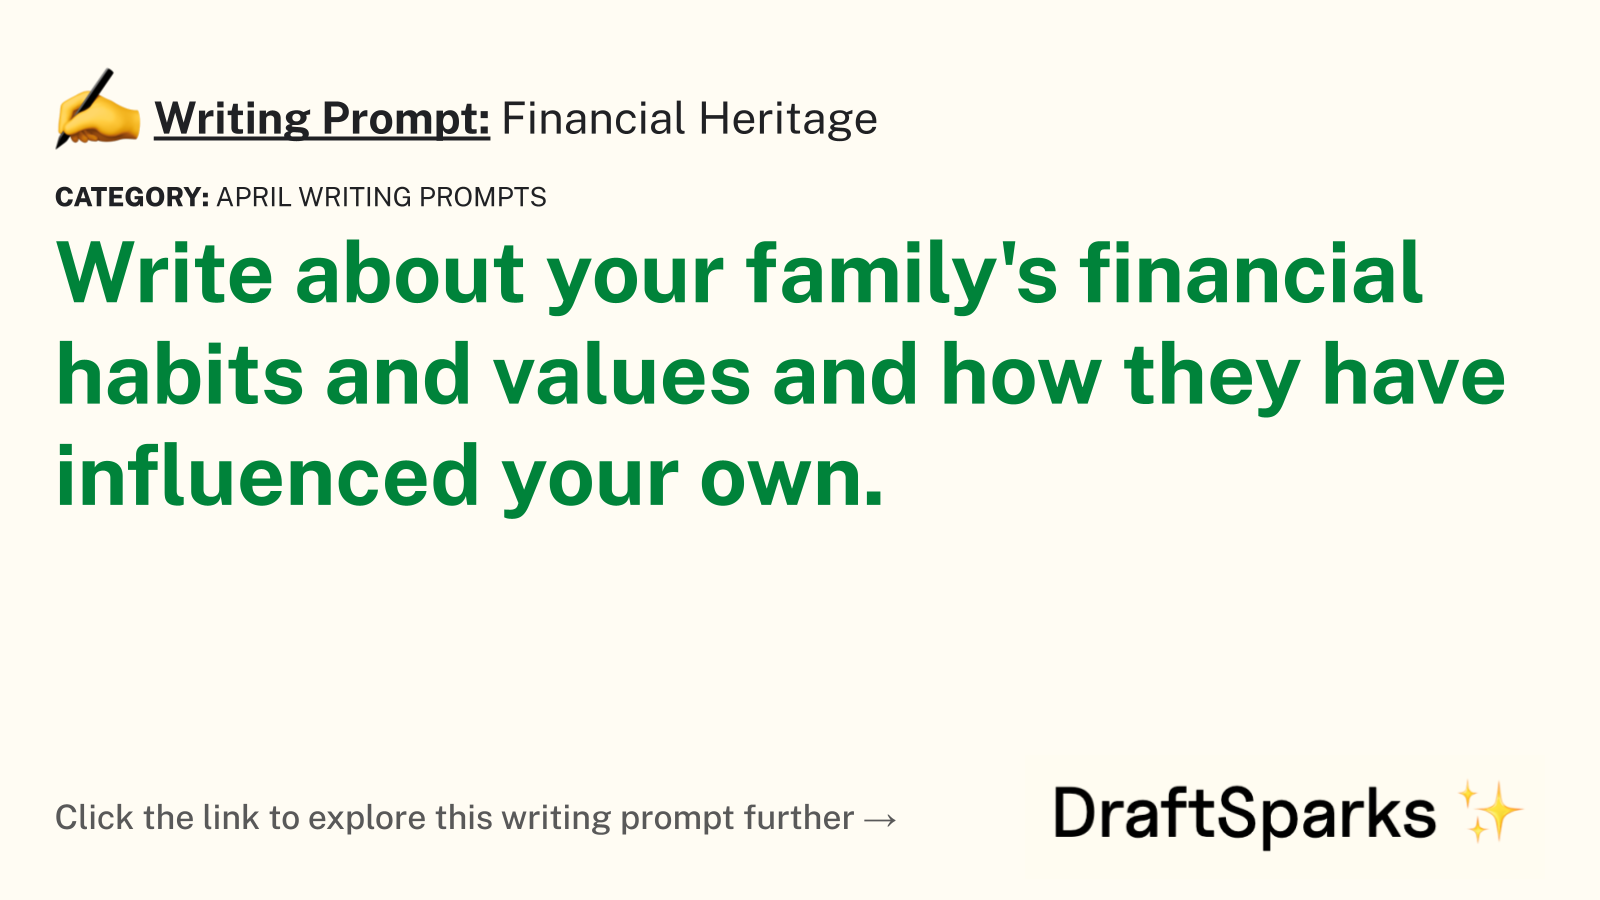 Financial Heritage